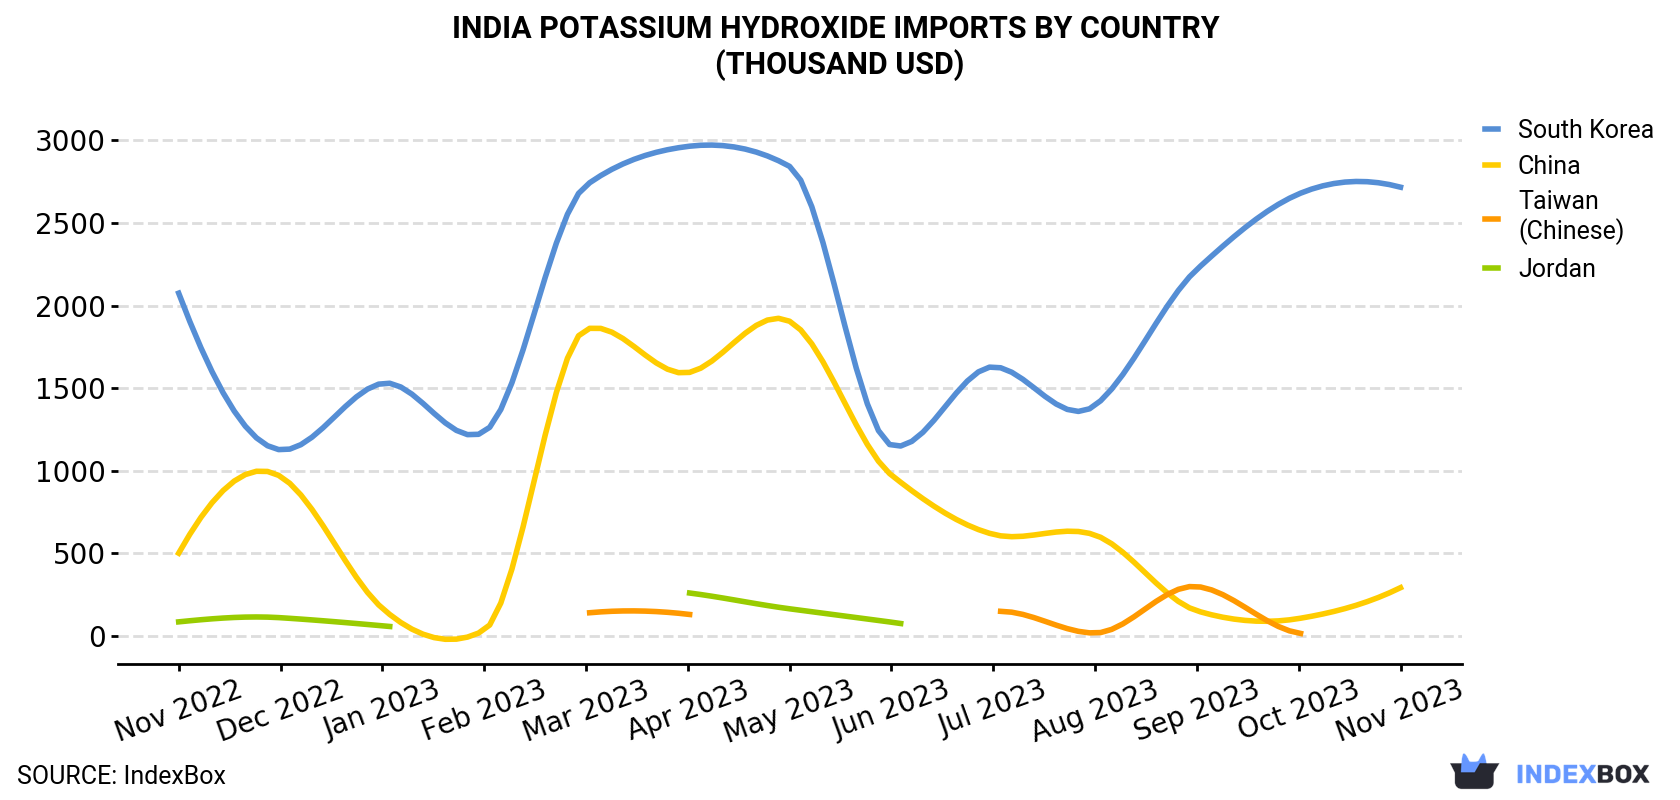 India Potassium Hydroxide Imports By Country (Thousand USD)